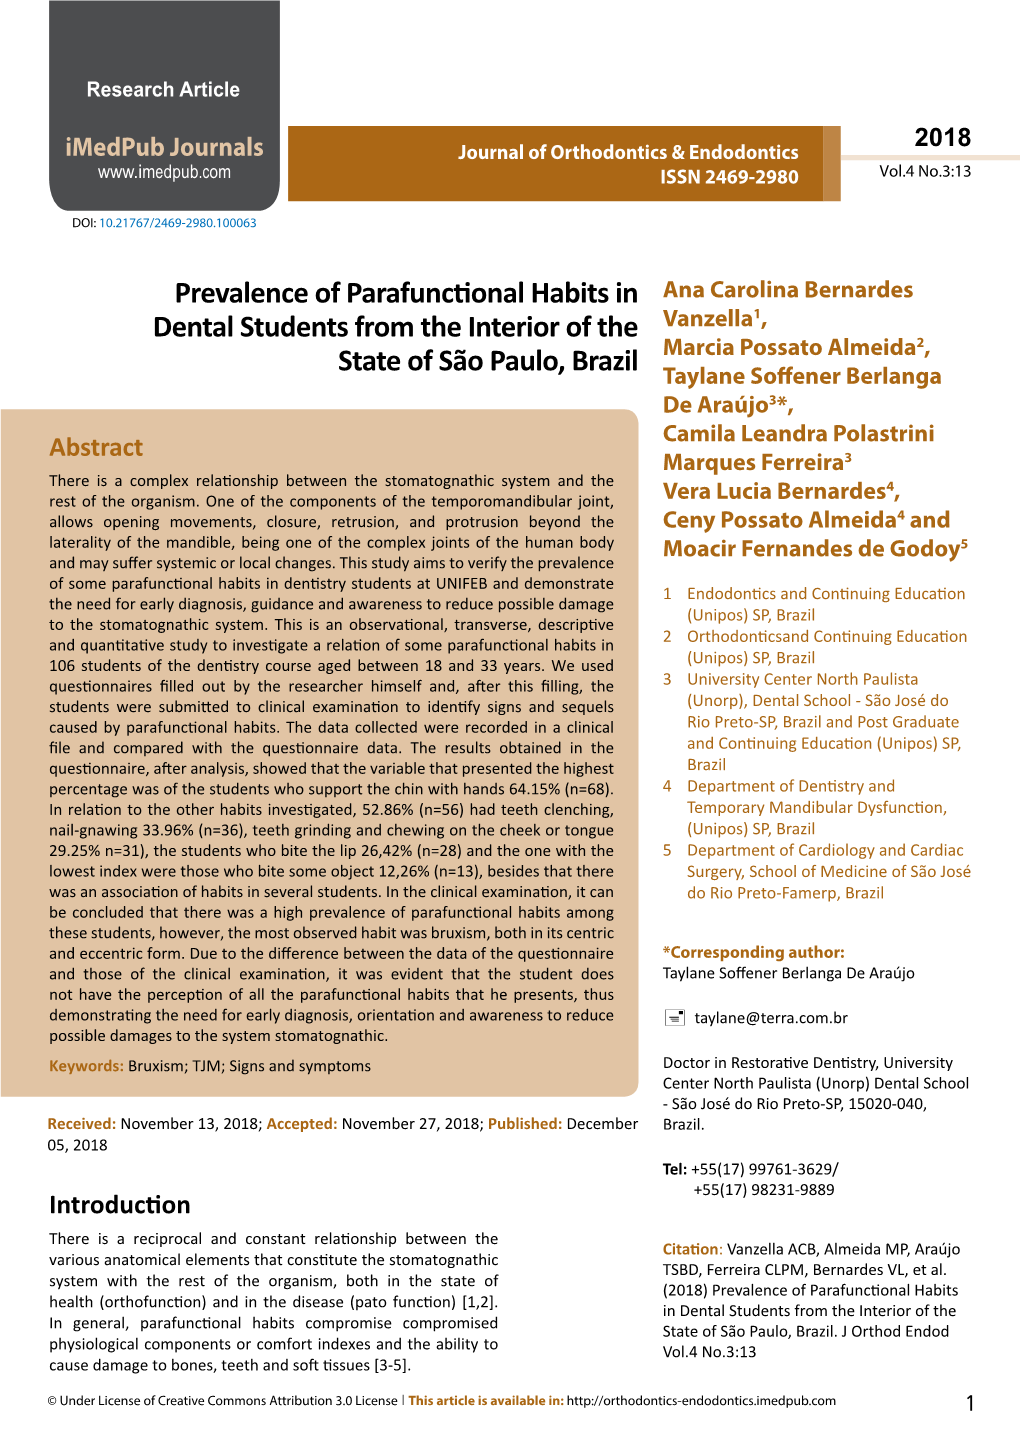 Prevalence of Parafunctional Habits in Dental Students from the Interior Of